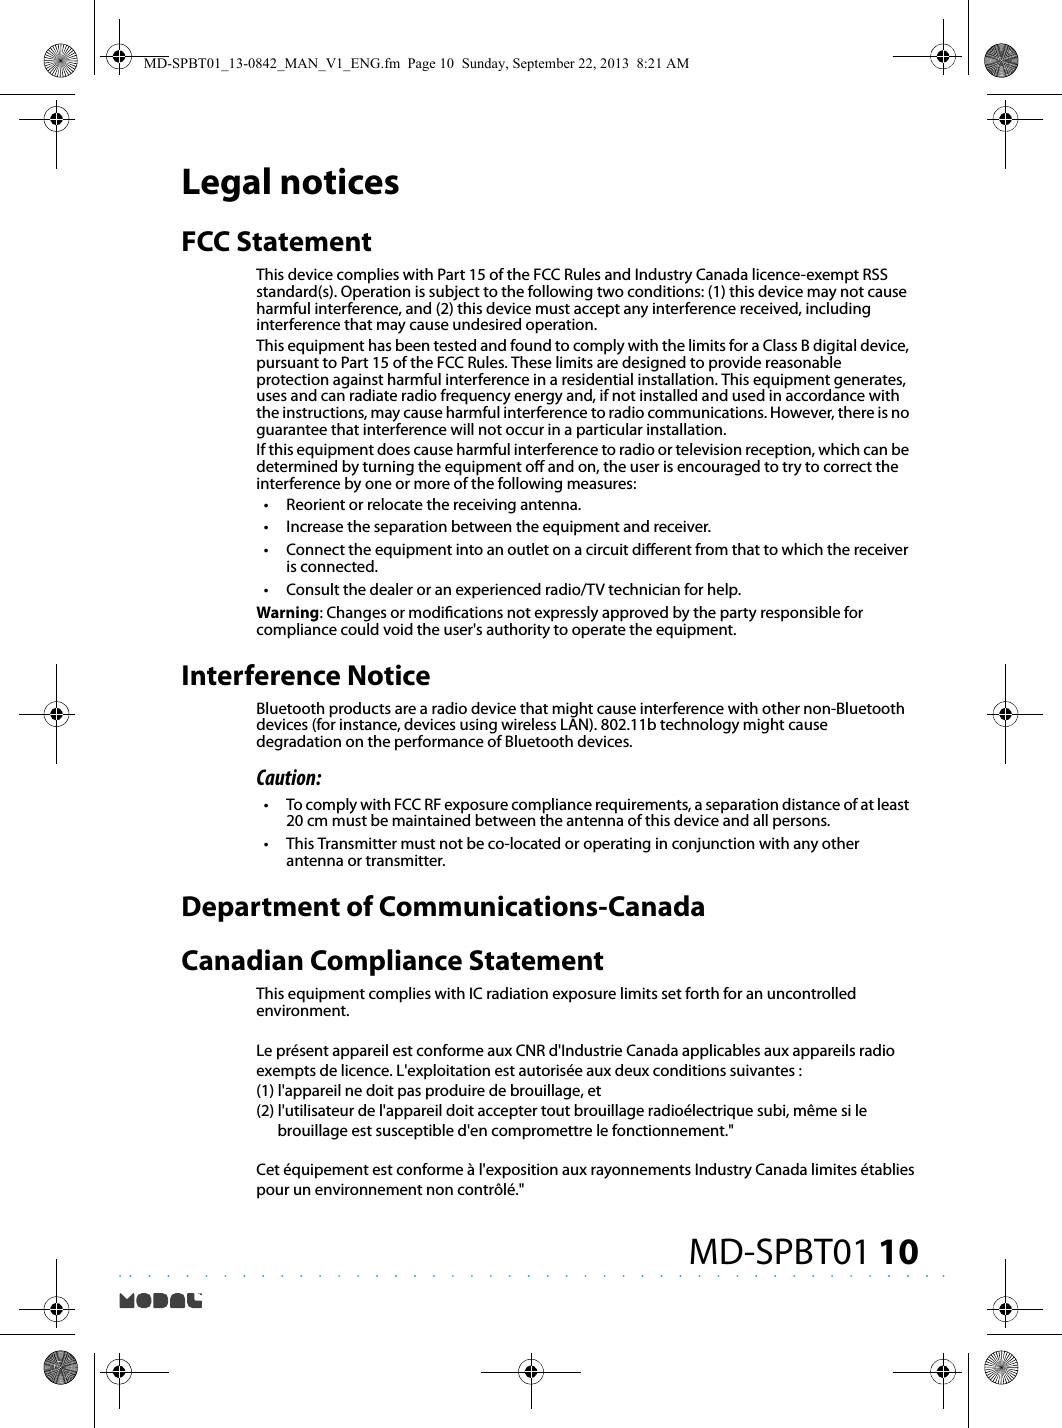 10MD-SPBT01Legal noticesFCC StatementThis device complies with Part 15 of the FCC Rules and Industry Canada licence-exempt RSS standard(s). Operation is subject to the following two conditions: (1) this device may not cause harmful interference, and (2) this device must accept any interference received, including interference that may cause undesired operation.This equipment has been tested and found to comply with the limits for a Class B digital device, pursuant to Part 15 of the FCC Rules. These limits are designed to provide reasonable protection against harmful interference in a residential installation. This equipment generates, uses and can radiate radio frequency energy and, if not installed and used in accordance with the instructions, may cause harmful interference to radio communications. However, there is no guarantee that interference will not occur in a particular installation.If this equipment does cause harmful interference to radio or television reception, which can be determined by turning the equipment o and on, the user is encouraged to try to correct the interference by one or more of the following measures:•Reorient or relocate the receiving antenna.•Increase the separation between the equipment and receiver.•Connect the equipment into an outlet on a circuit dierent from that to which the receiver is connected.•Consult the dealer or an experienced radio/TV technician for help.Warning: Changes or modications not expressly approved by the party responsible for compliance could void the user&apos;s authority to operate the equipment.Interference Notice Bluetooth products are a radio device that might cause interference with other non-Bluetooth devices (for instance, devices using wireless LAN). 802.11b technology might cause degradation on the performance of Bluetooth devices. Caution: •To comply with FCC RF exposure compliance requirements, a separation distance of at least 20 cm must be maintained between the antenna of this device and all persons. •This Transmitter must not be co-located or operating in conjunction with any other antenna or transmitter. Department of Communications-Canada Canadian Compliance Statement This equipment complies with IC radiation exposure limits set forth for an uncontrolled environment.Le présent appareil est conforme aux CNR d&apos;Industrie Canada applicables aux appareils radio exempts de licence. L&apos;exploitation est autorisée aux deux conditions suivantes : (1) l&apos;appareil ne doit pas produire de brouillage, et (2) l&apos;utilisateur de l&apos;appareil doit accepter tout brouillage radioélectrique subi, même si le       brouillage est susceptible d&apos;en compromettre le fonctionnement.&quot;Cet équipement est conforme à l&apos;exposition aux rayonnements Industry Canada limites établies pour un environnement non contrôlé.&quot;MD-SPBT01_13-0842_MAN_V1_ENG.fm  Page 10  Sunday, September 22, 2013  8:21 AM